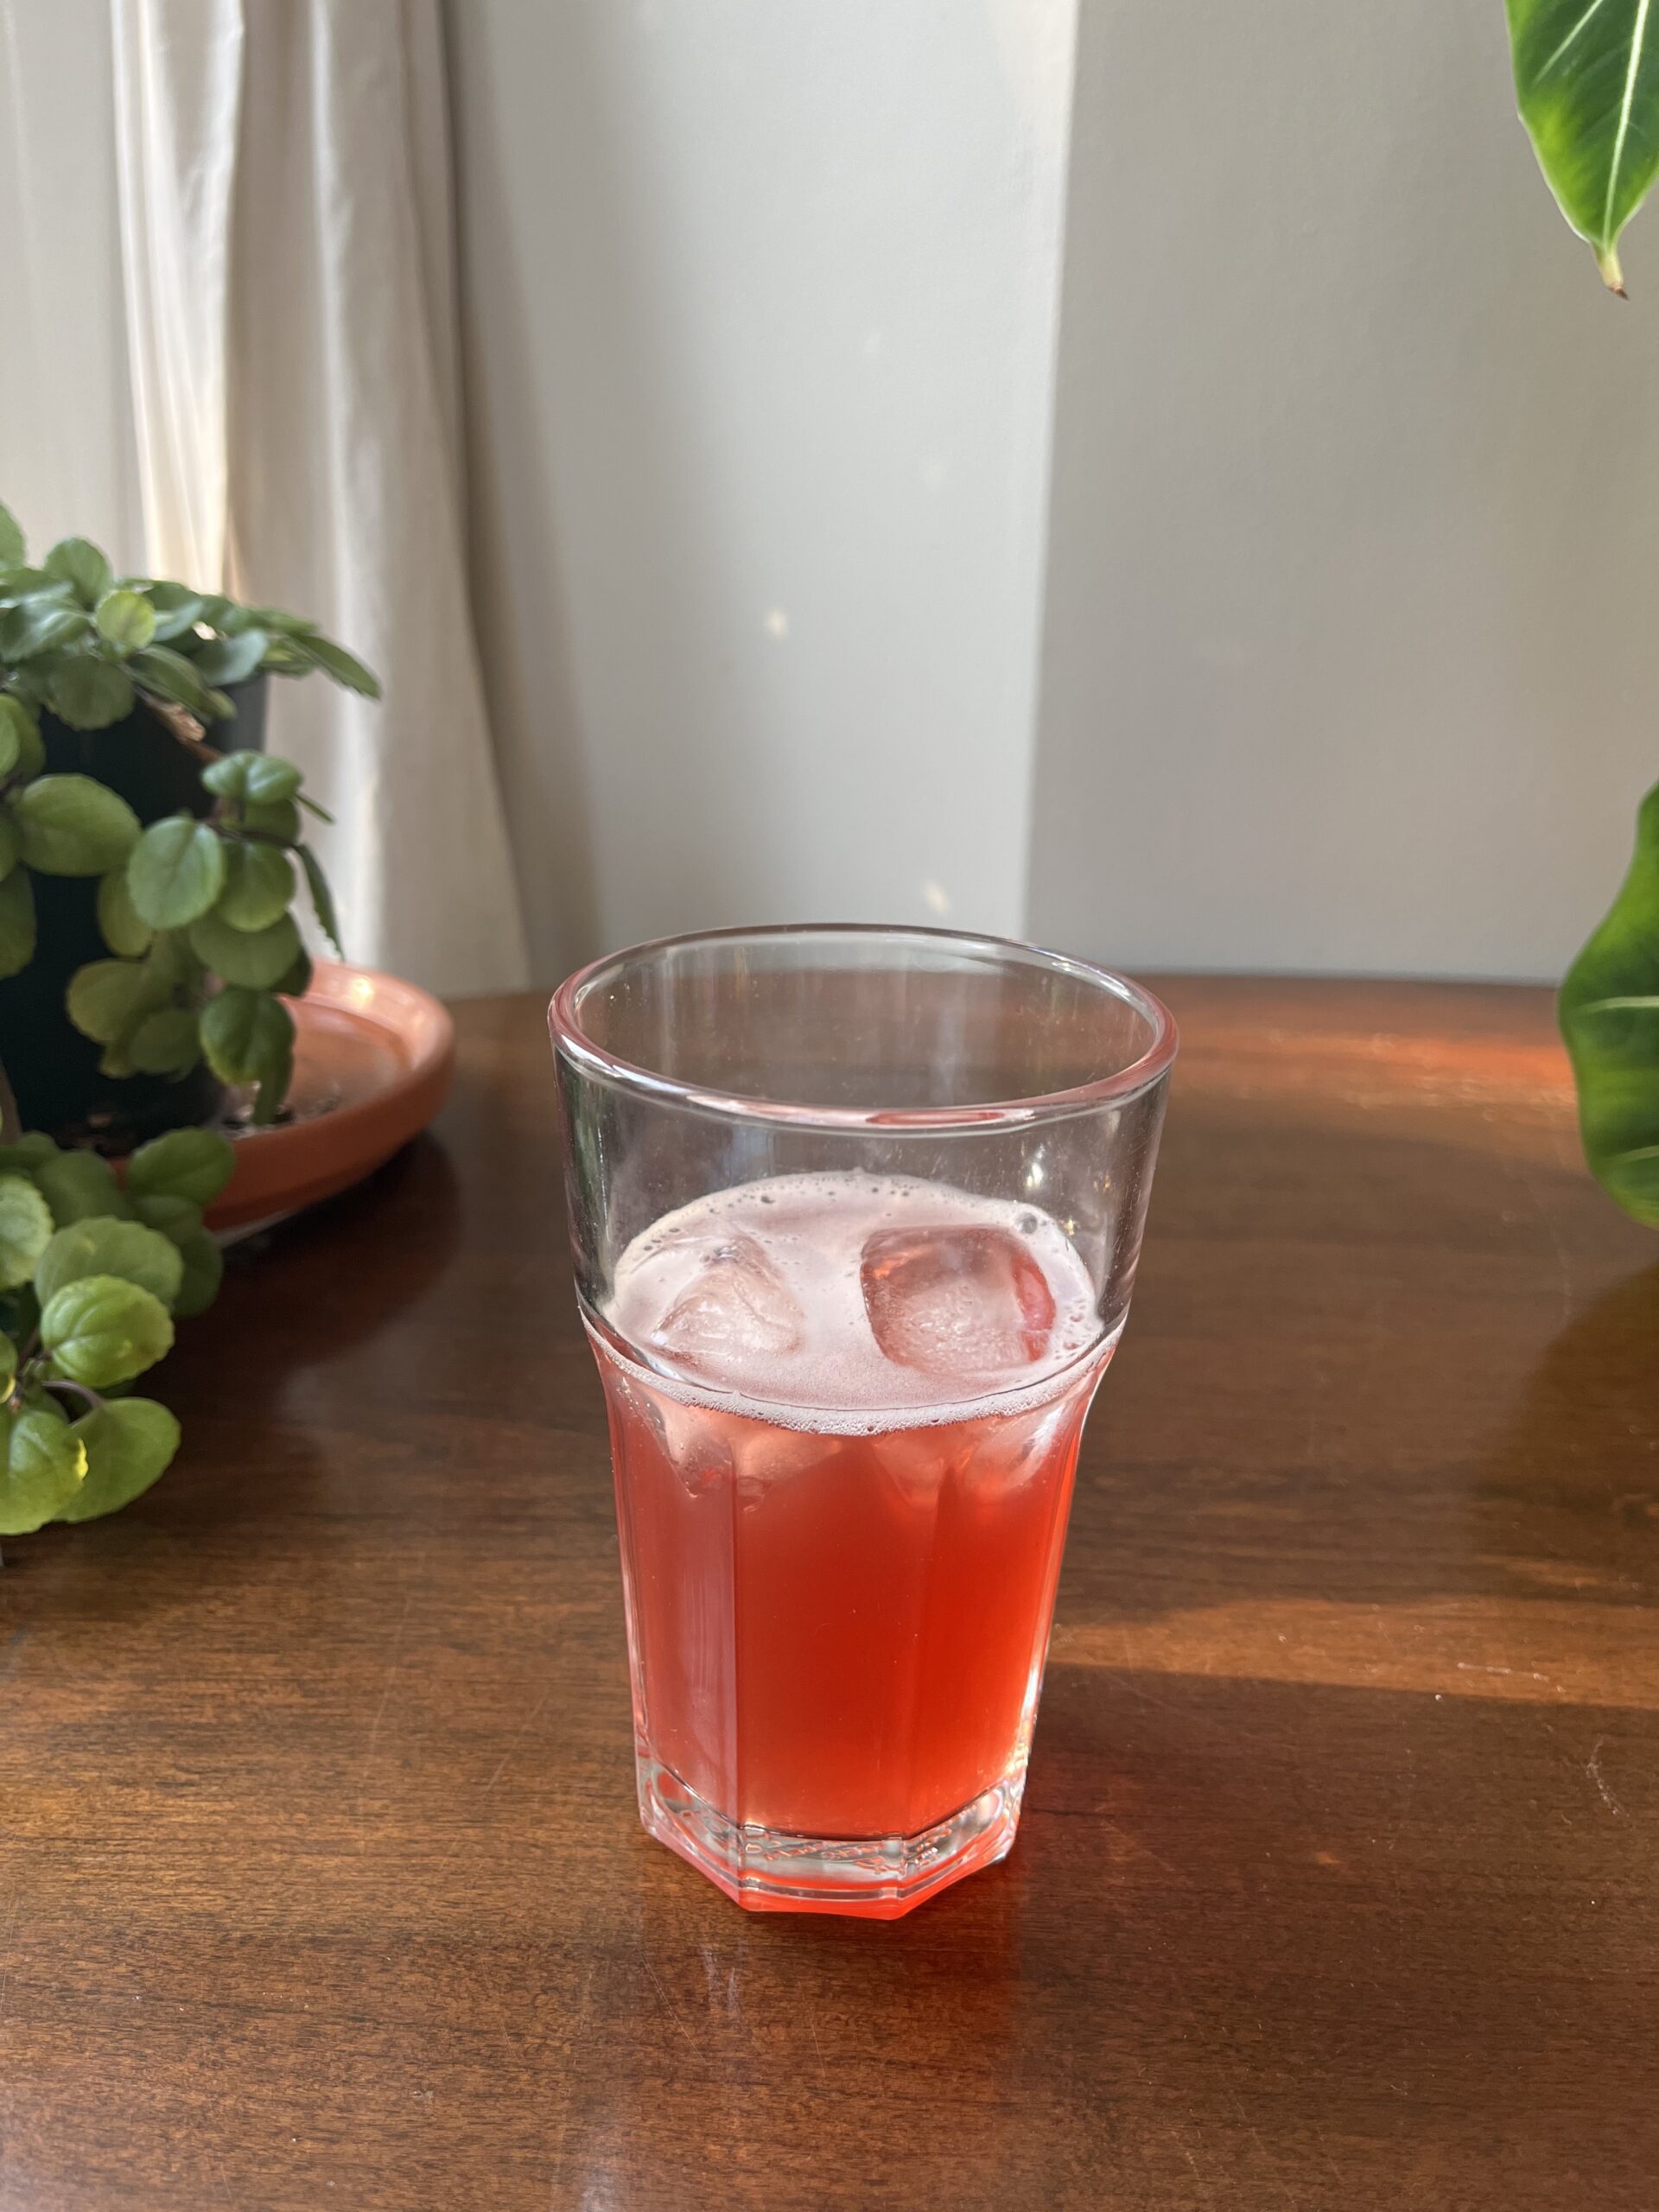 A glass of red beverage with ice on a wooden table, next to a plant in a pink pot and a large green leaf.